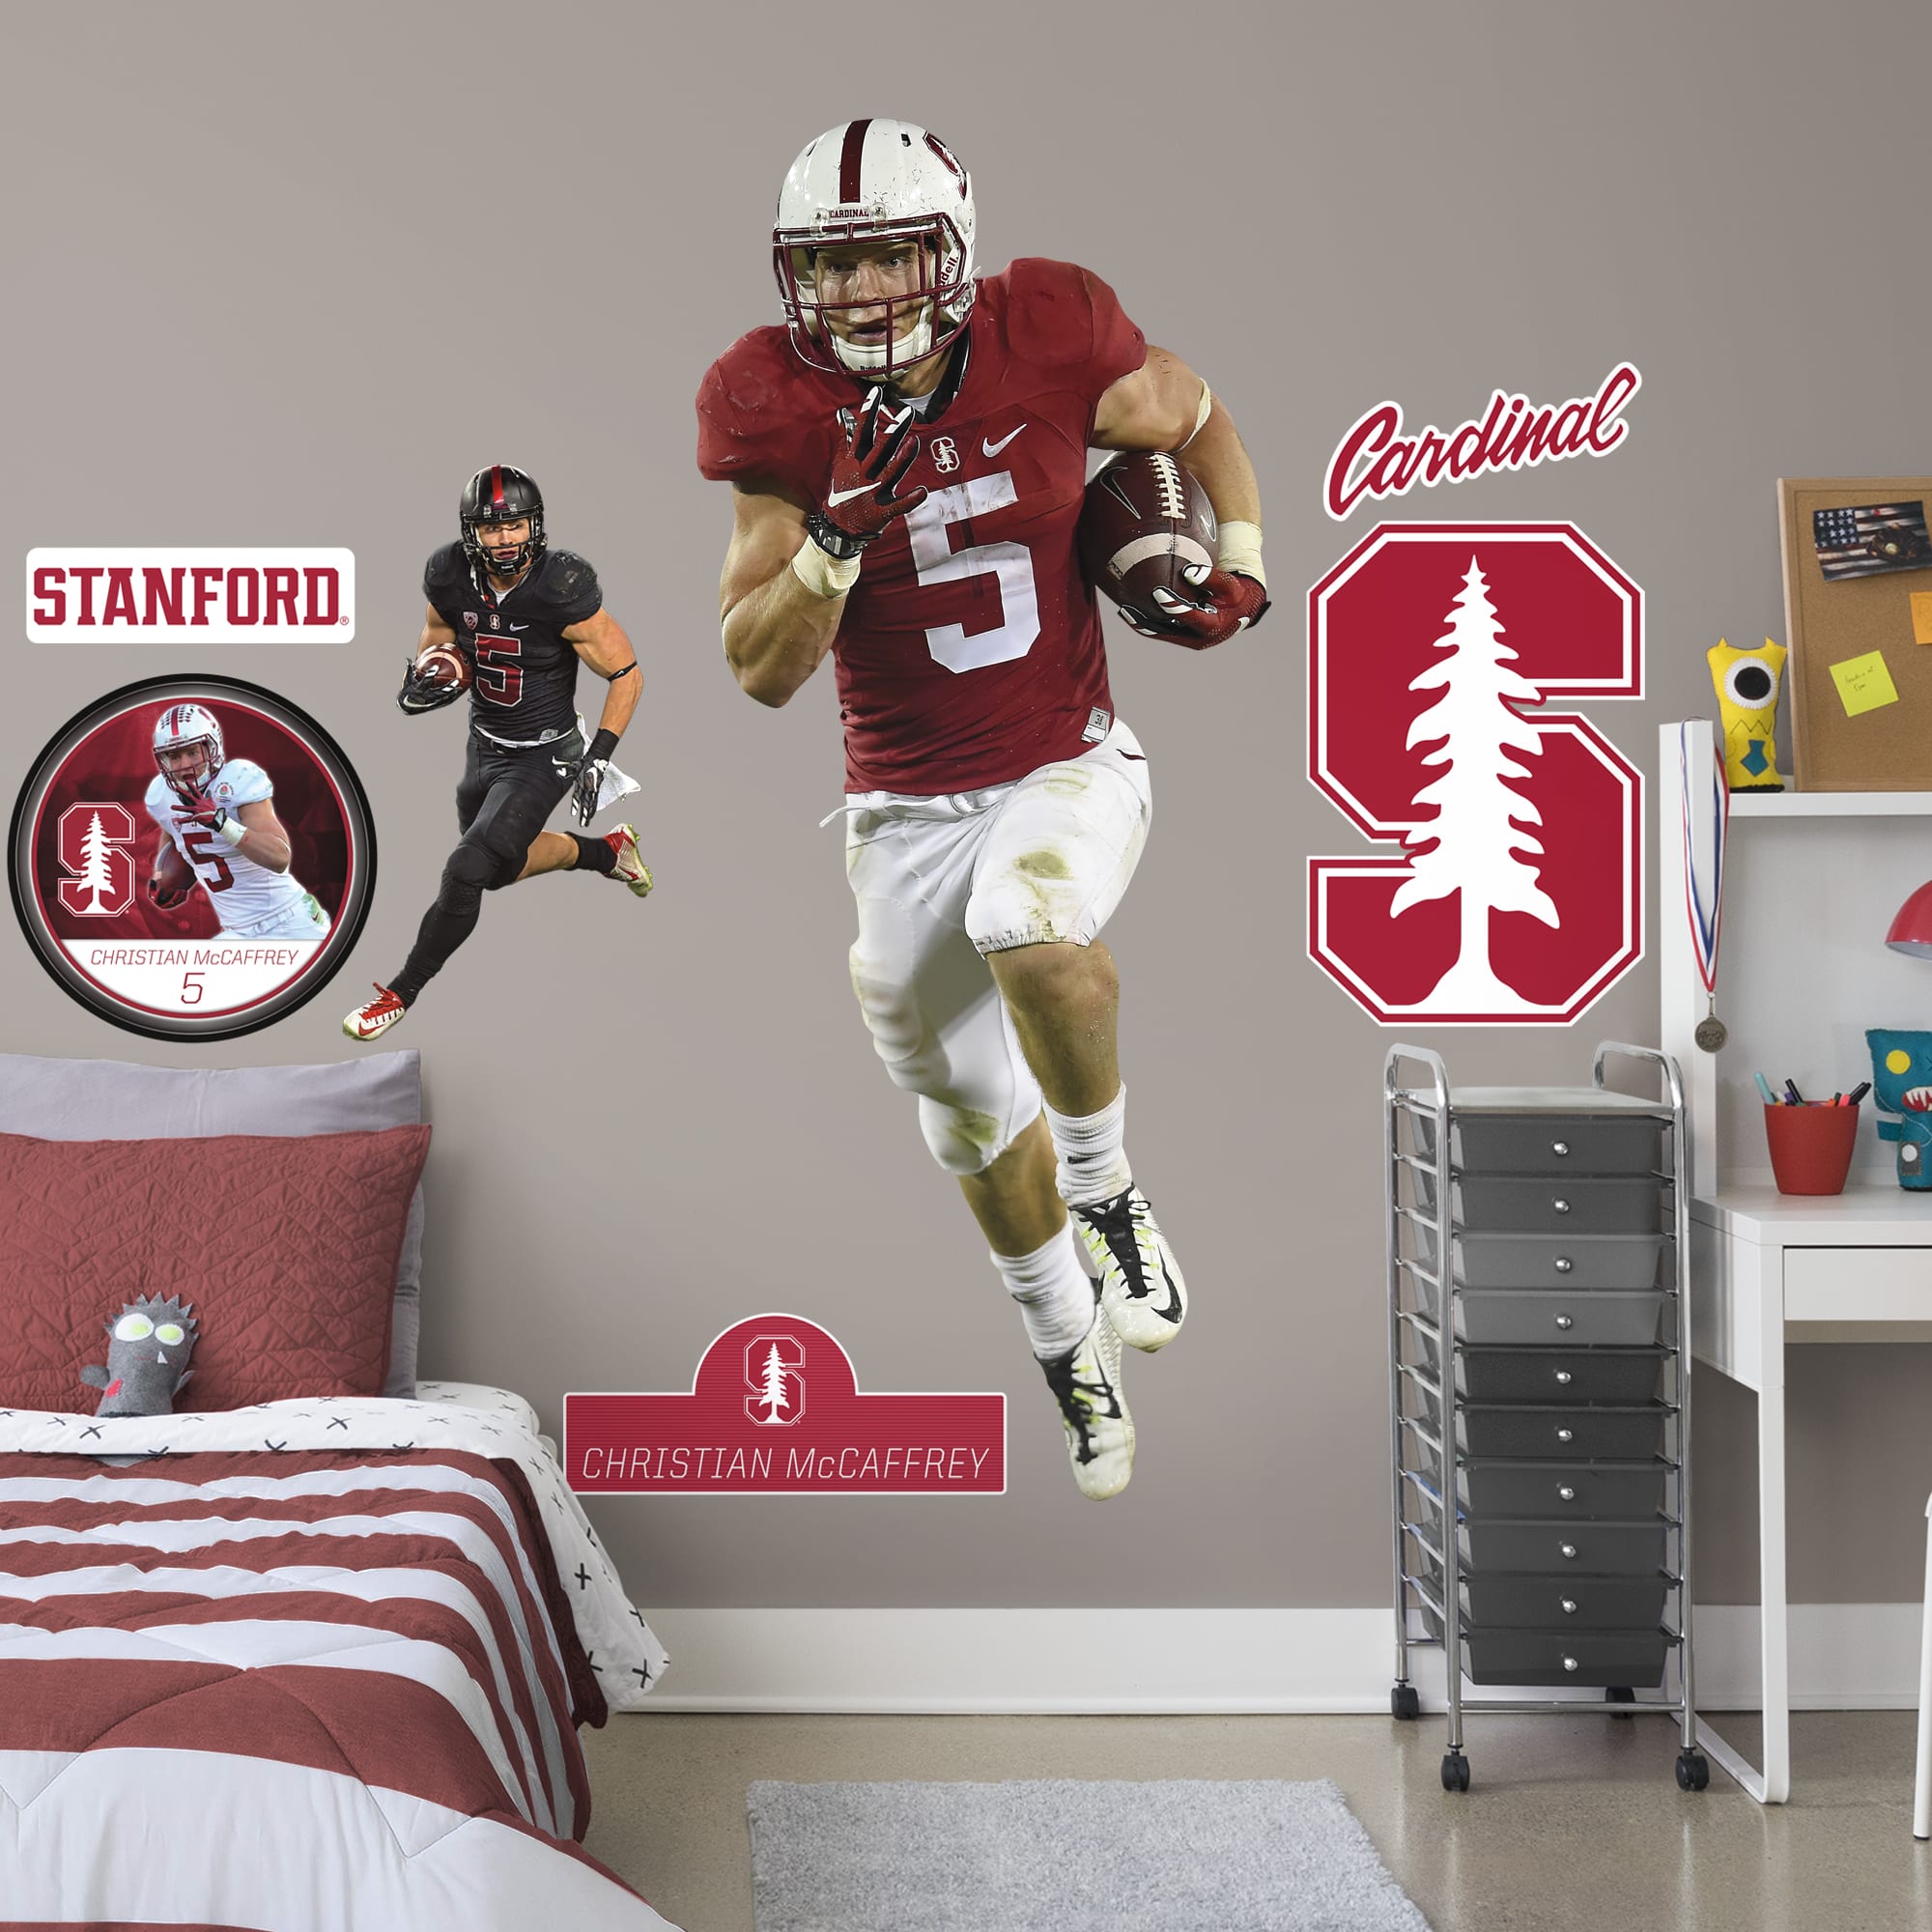 Christian McCaffrey for Stanford Cardinal: Stanford - Officially Licensed Removable Wall Decal Life-Size Athlete + 2 Decals (31"